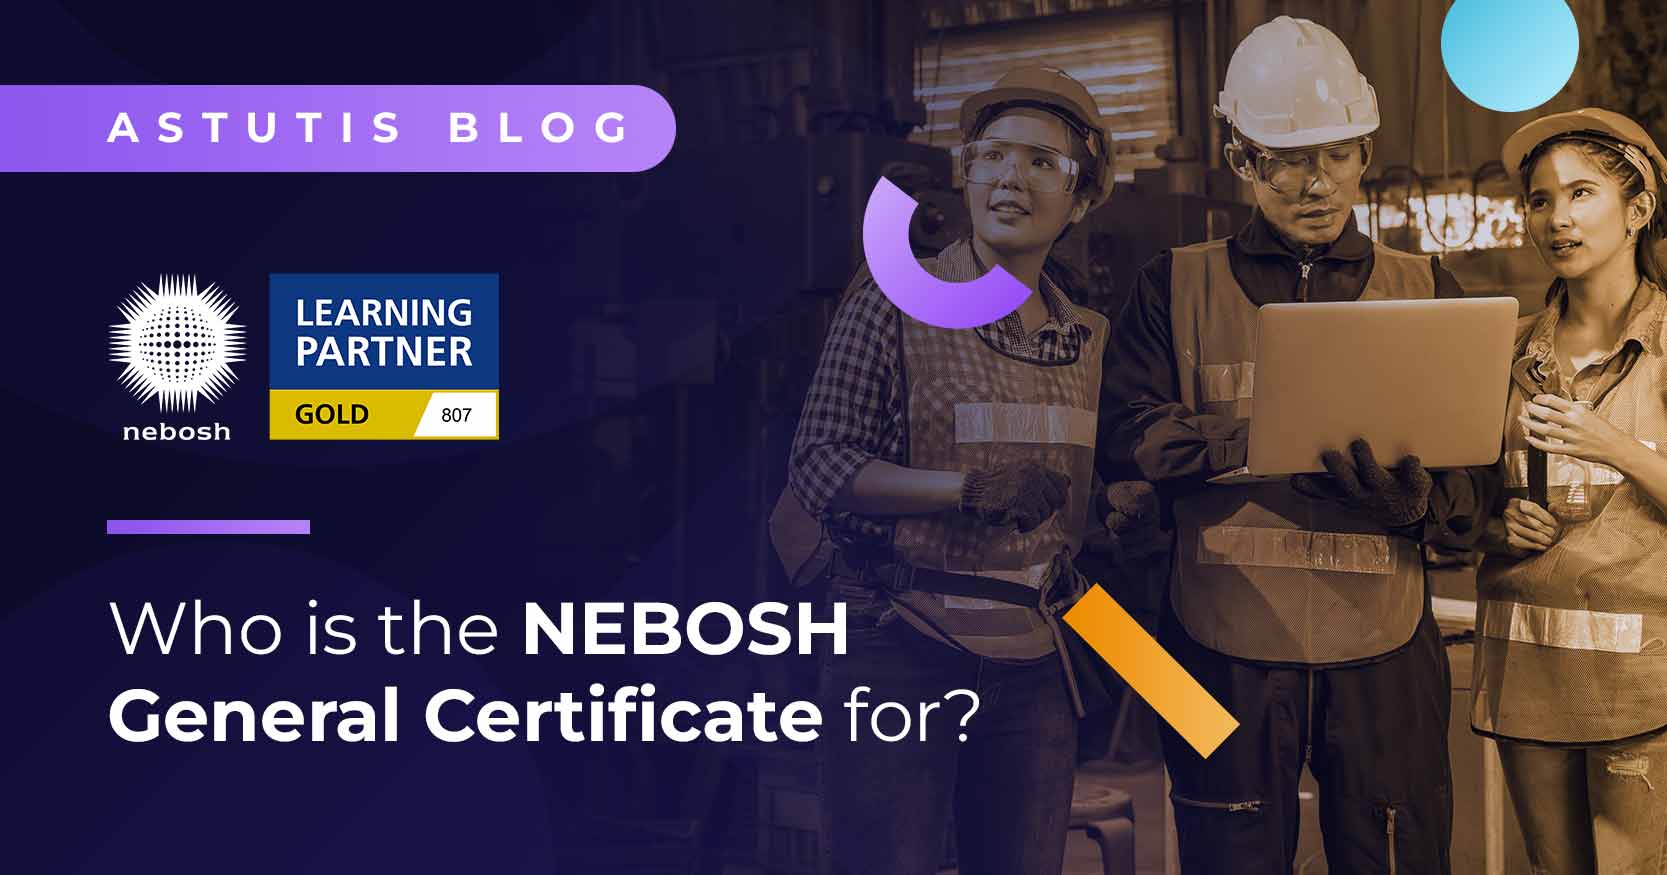 Who is the NEBOSH General Certificate for? Image